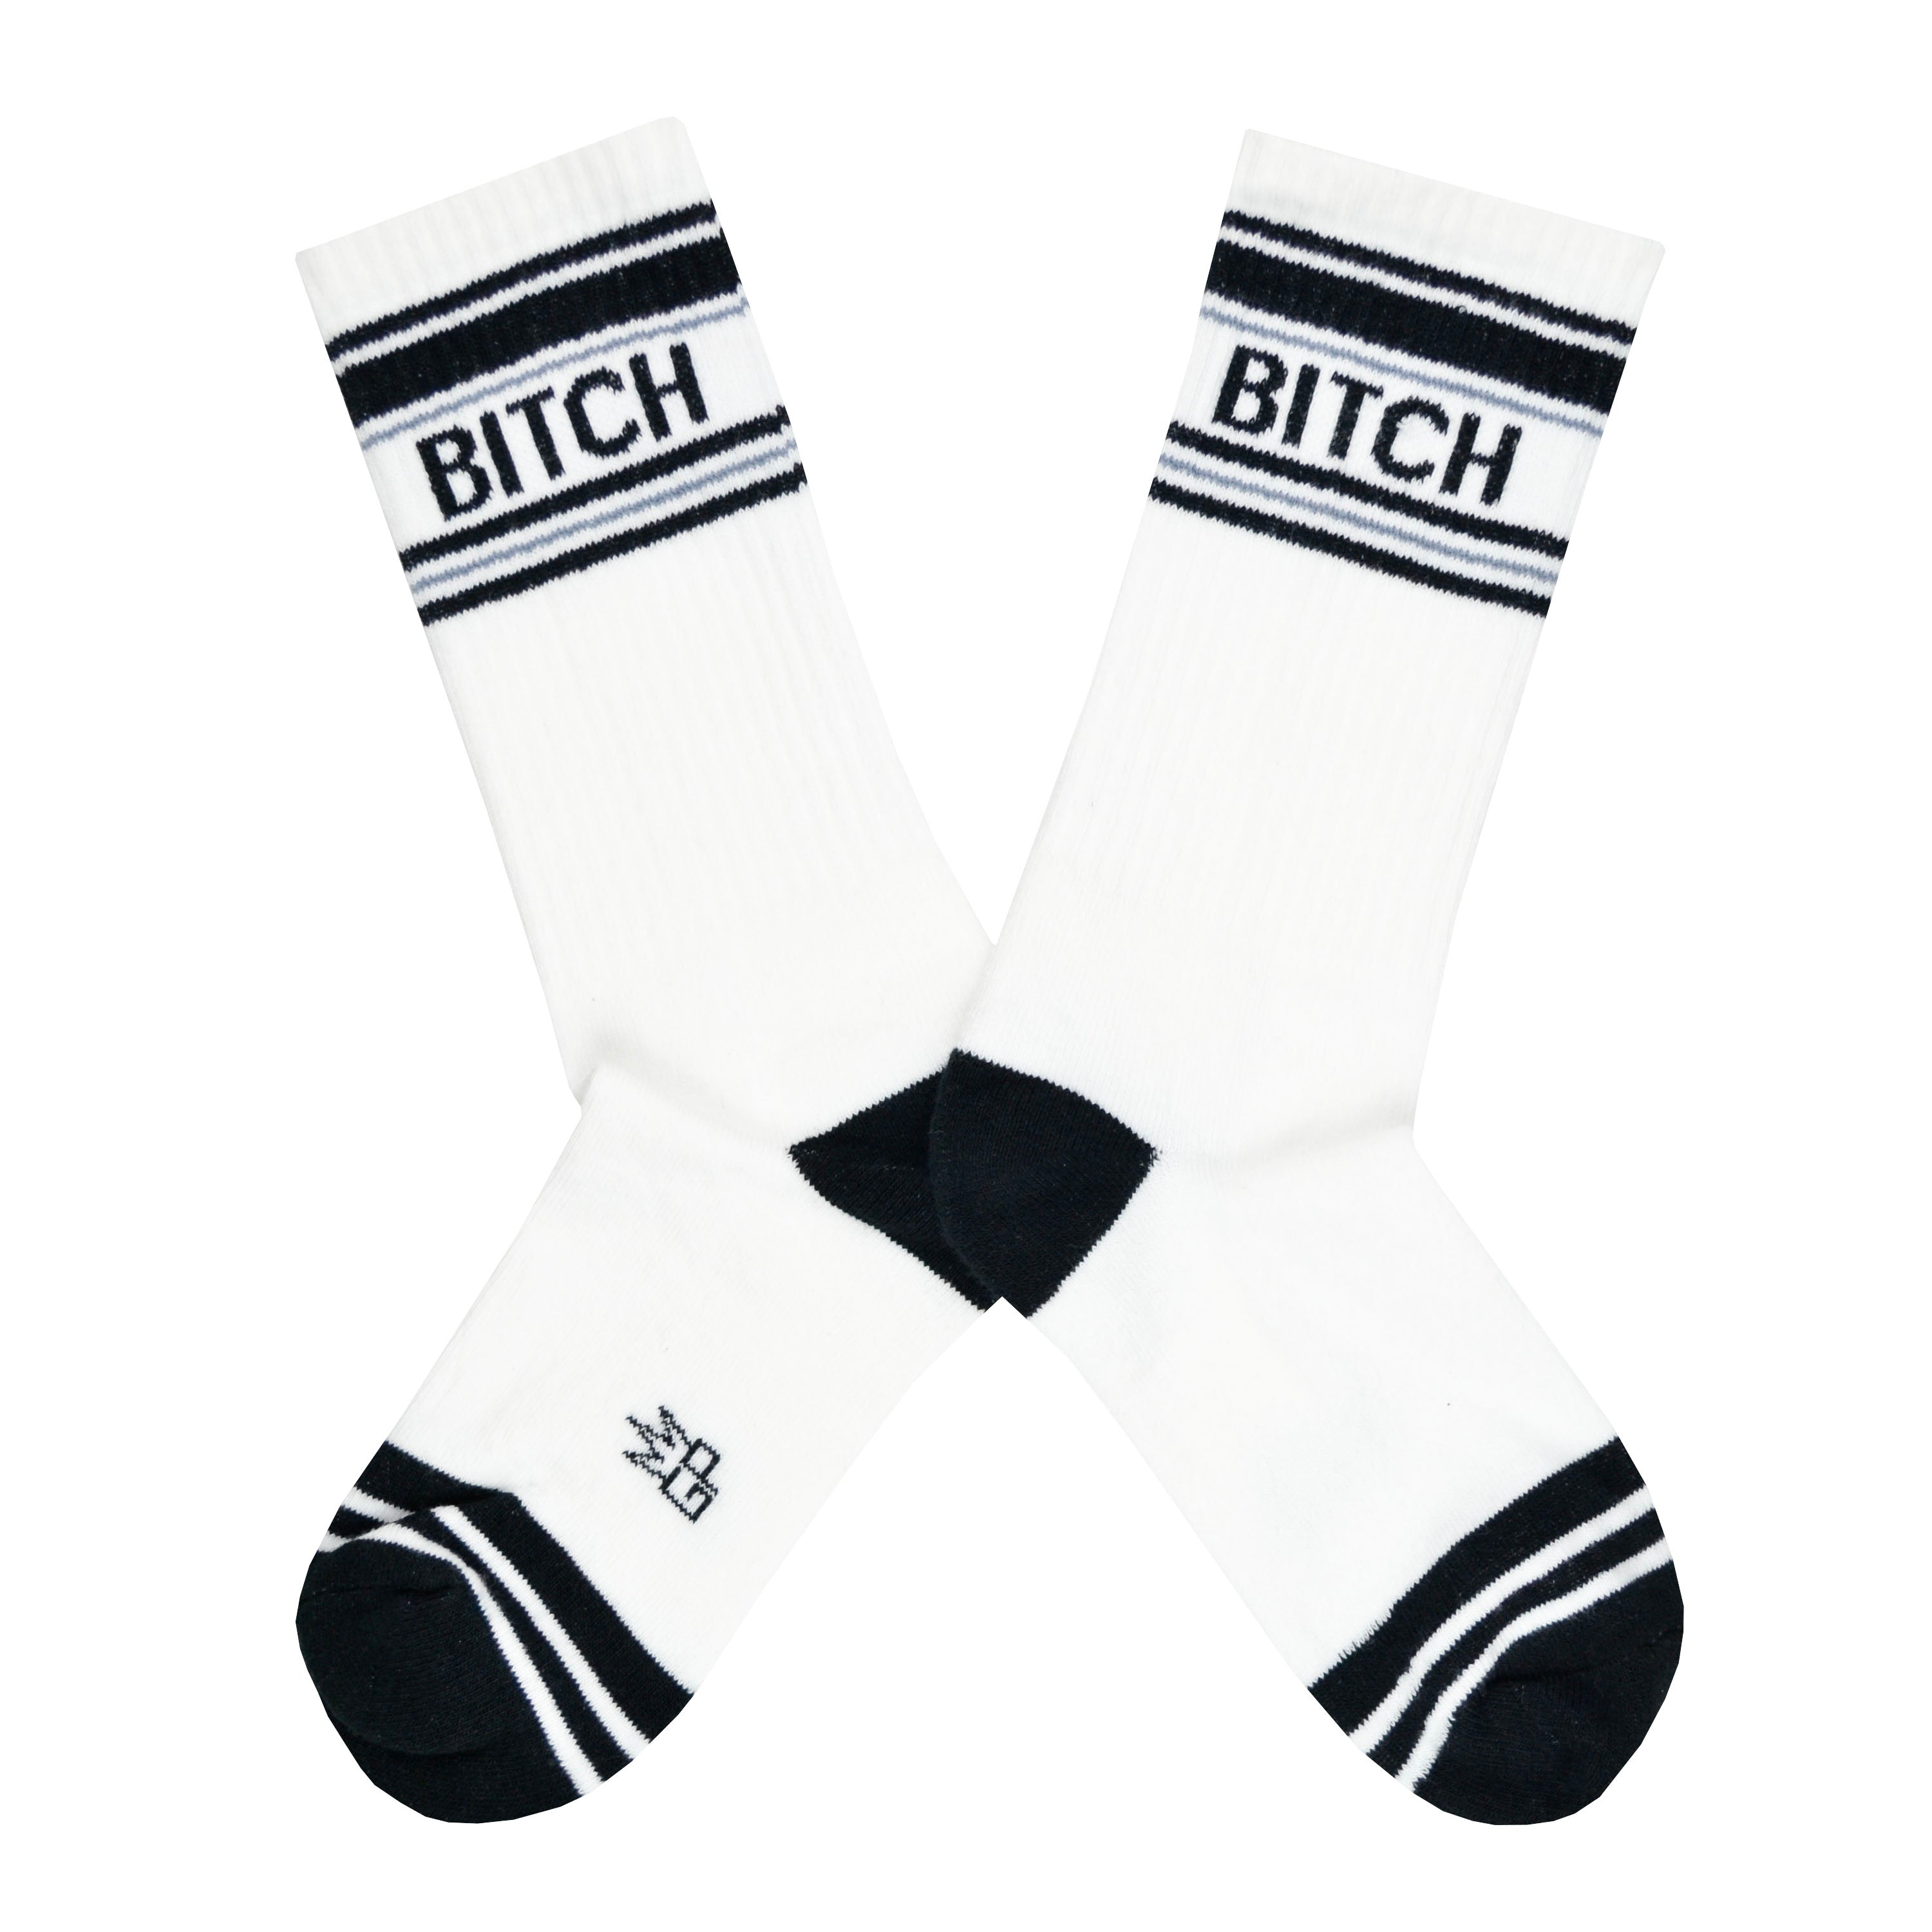 These white cotton unisex crew socks with a black toe and striped cuff by the brand Gumball Poodle feature the words 